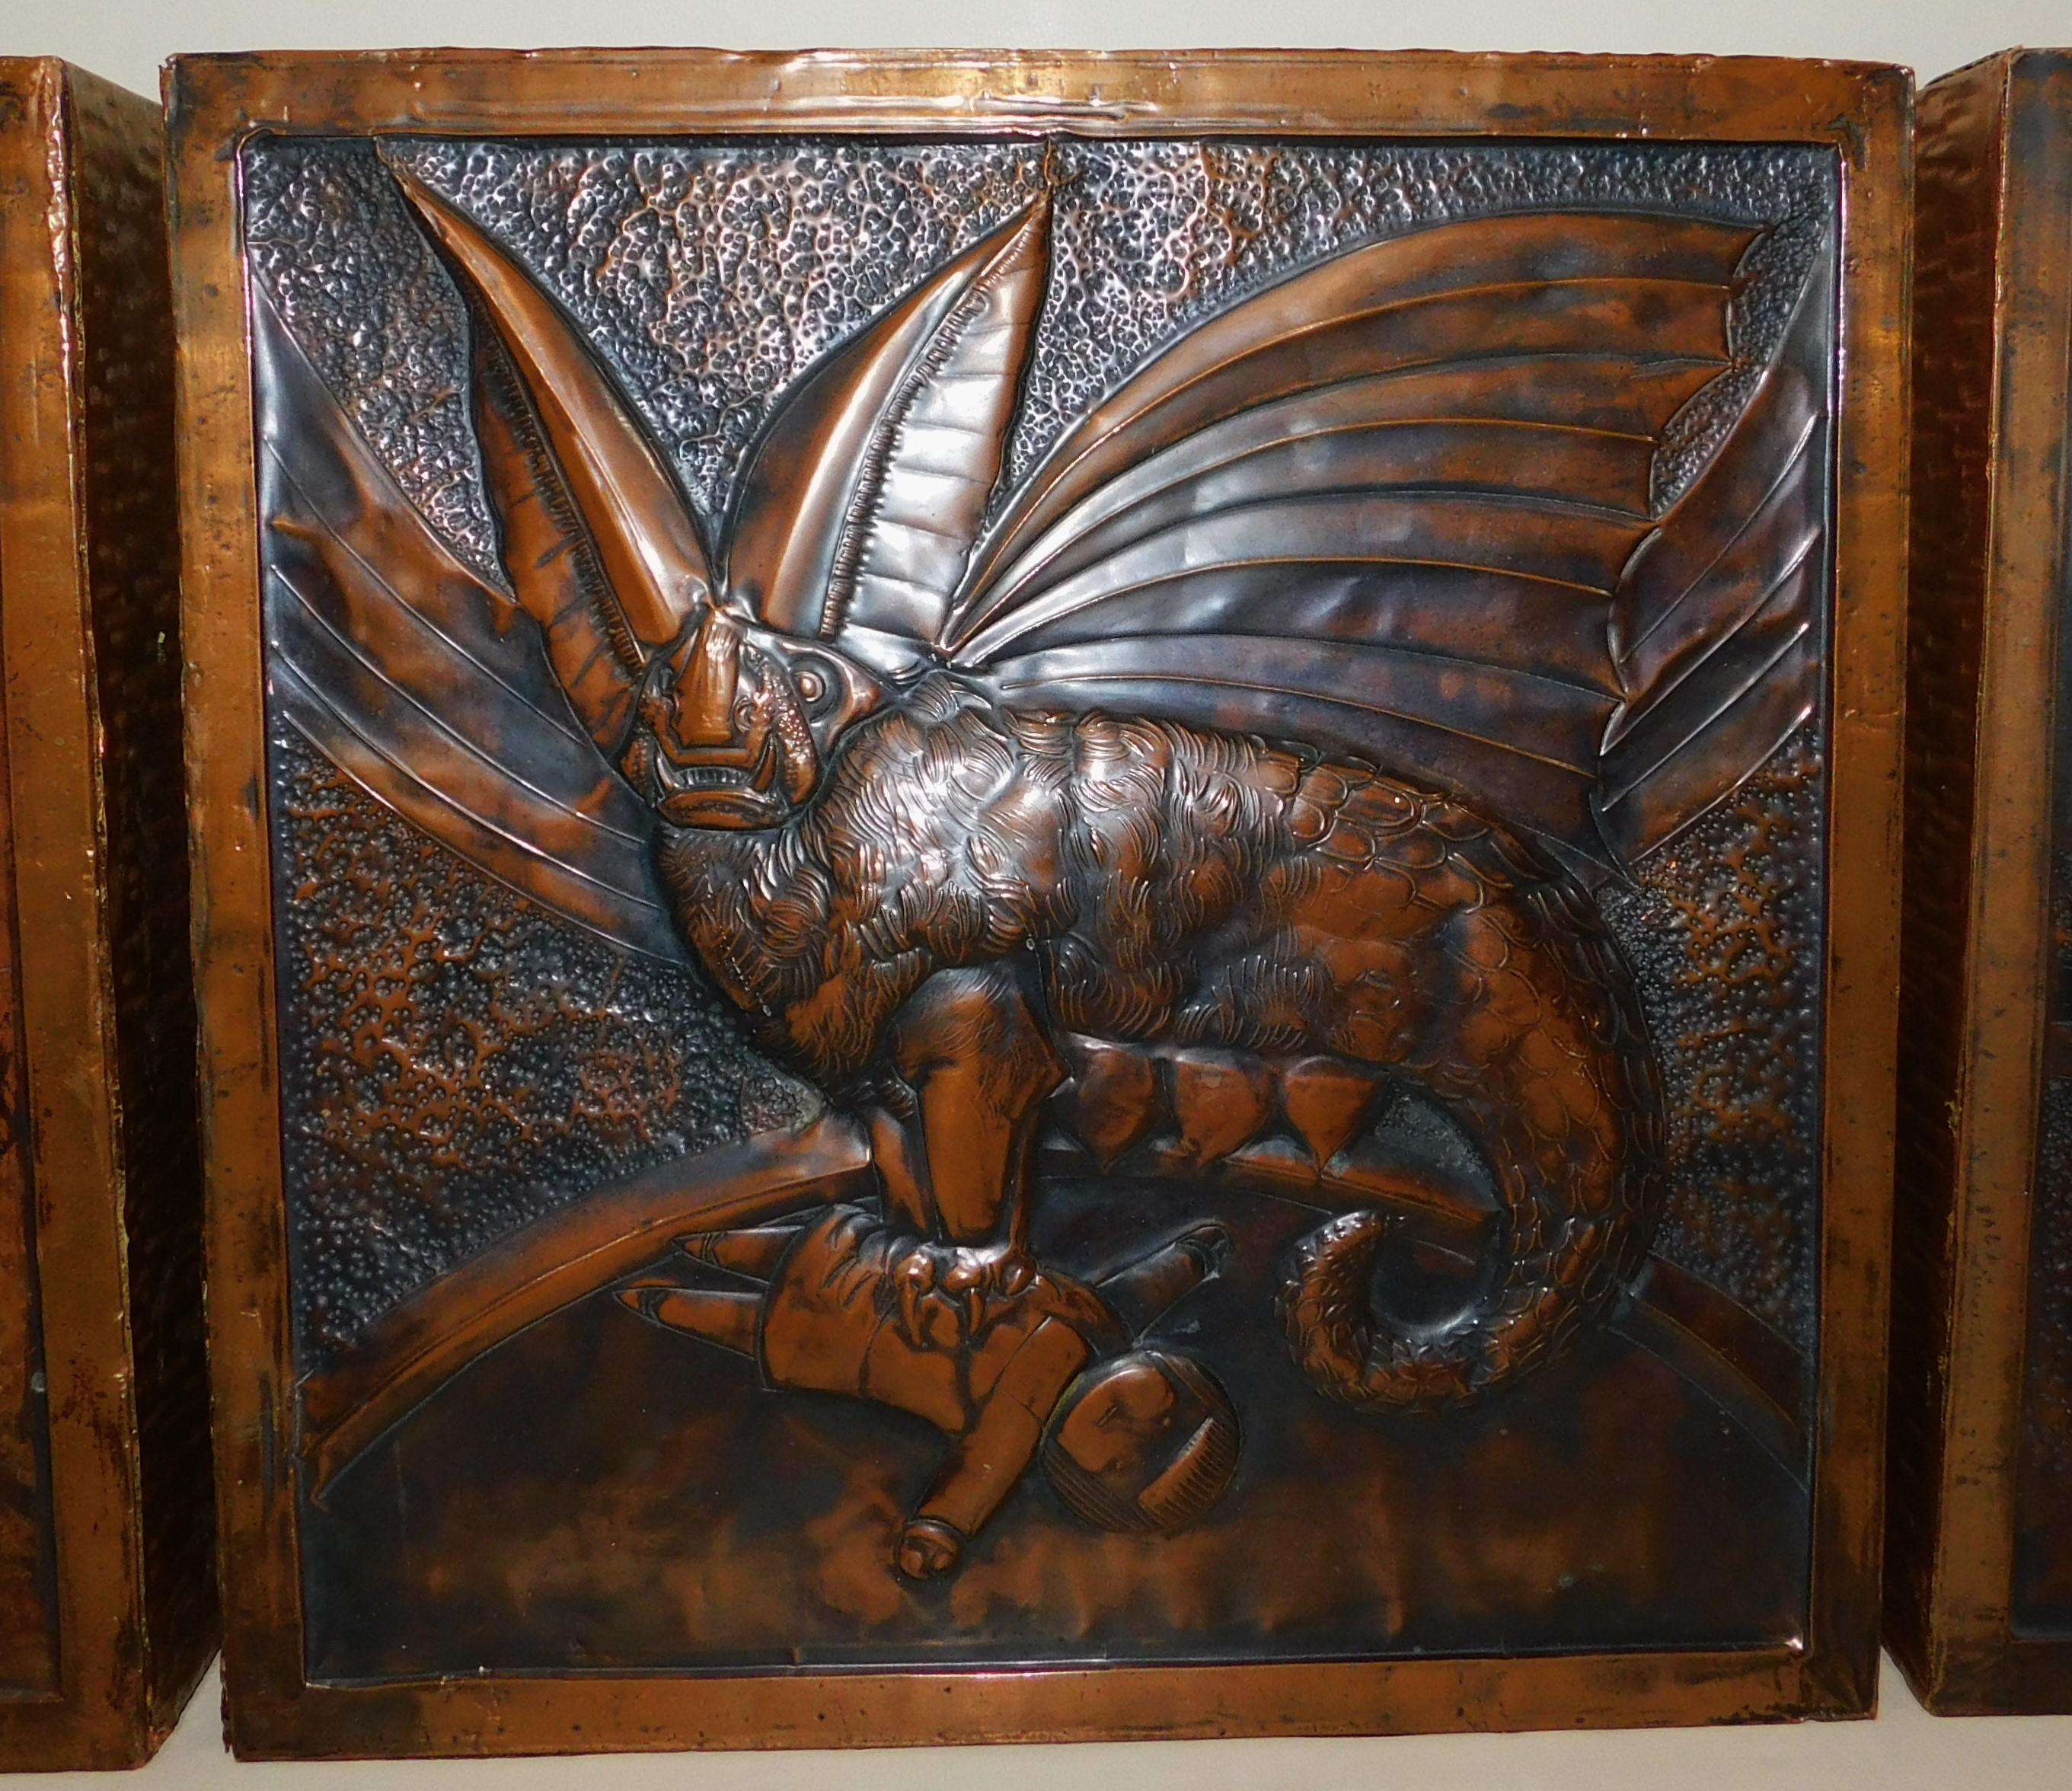 Three Original Hand-Hammered Copper Metal Wall Art Decoration Panels Monsters In Good Condition For Sale In Hamilton, Ontario